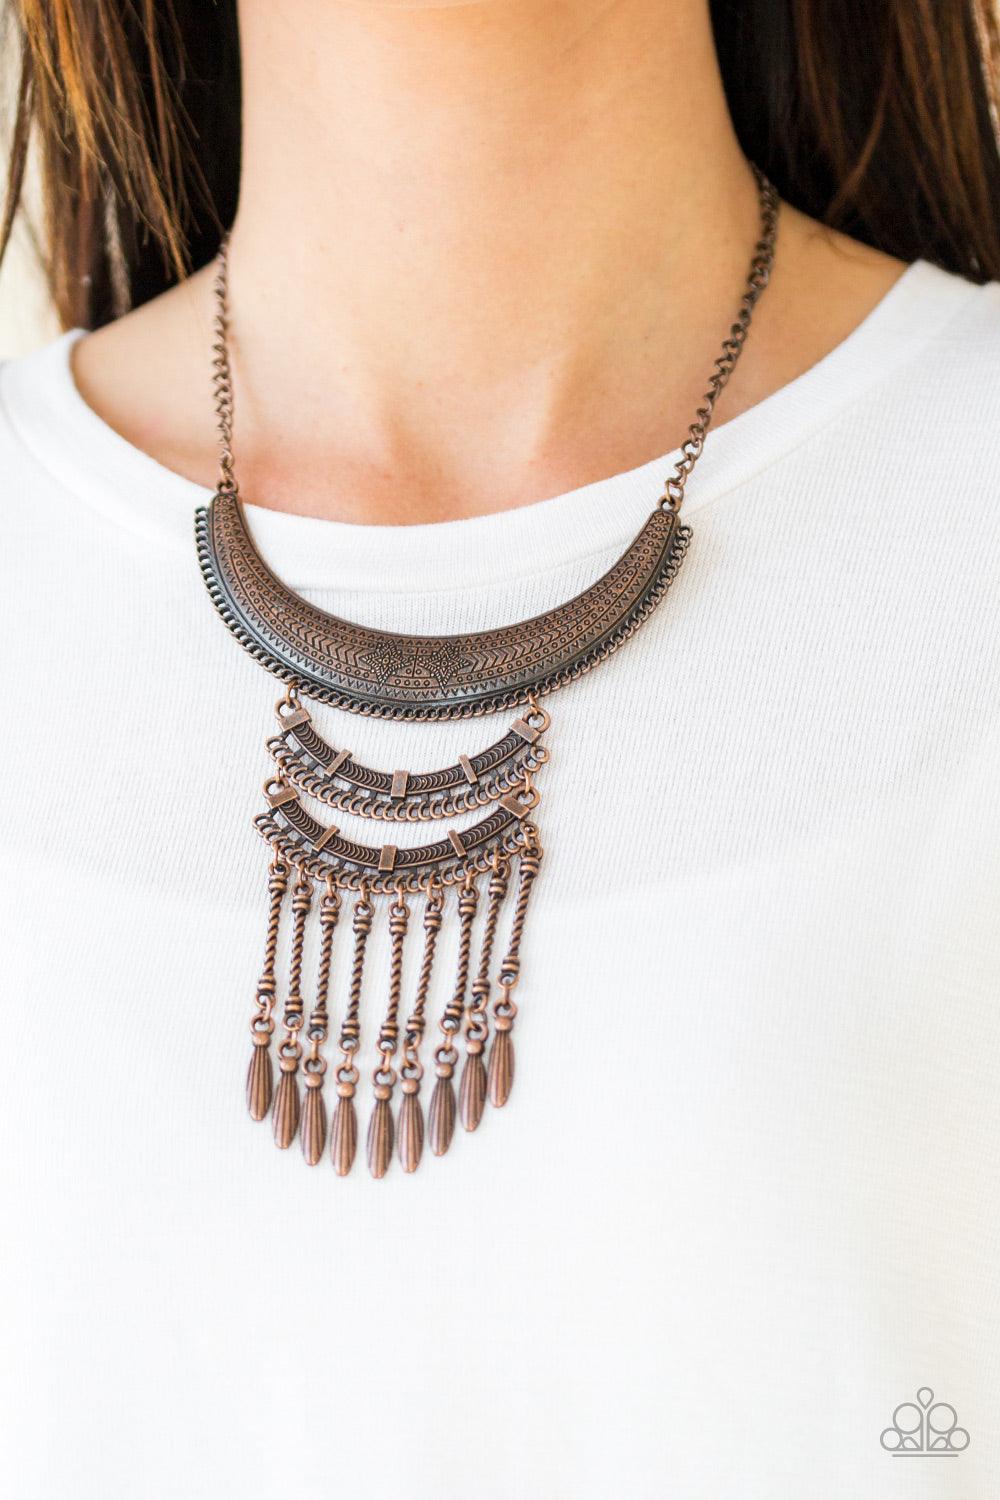 Paparazzi Accessories Eastern Empress - Copper Stamped and embossed in tribal inspired patterns, three copper plates connect down the chest, creating a fiercely stacked pendant. Attached to twisted copper rods, ornate copper beads swing from the bottom of